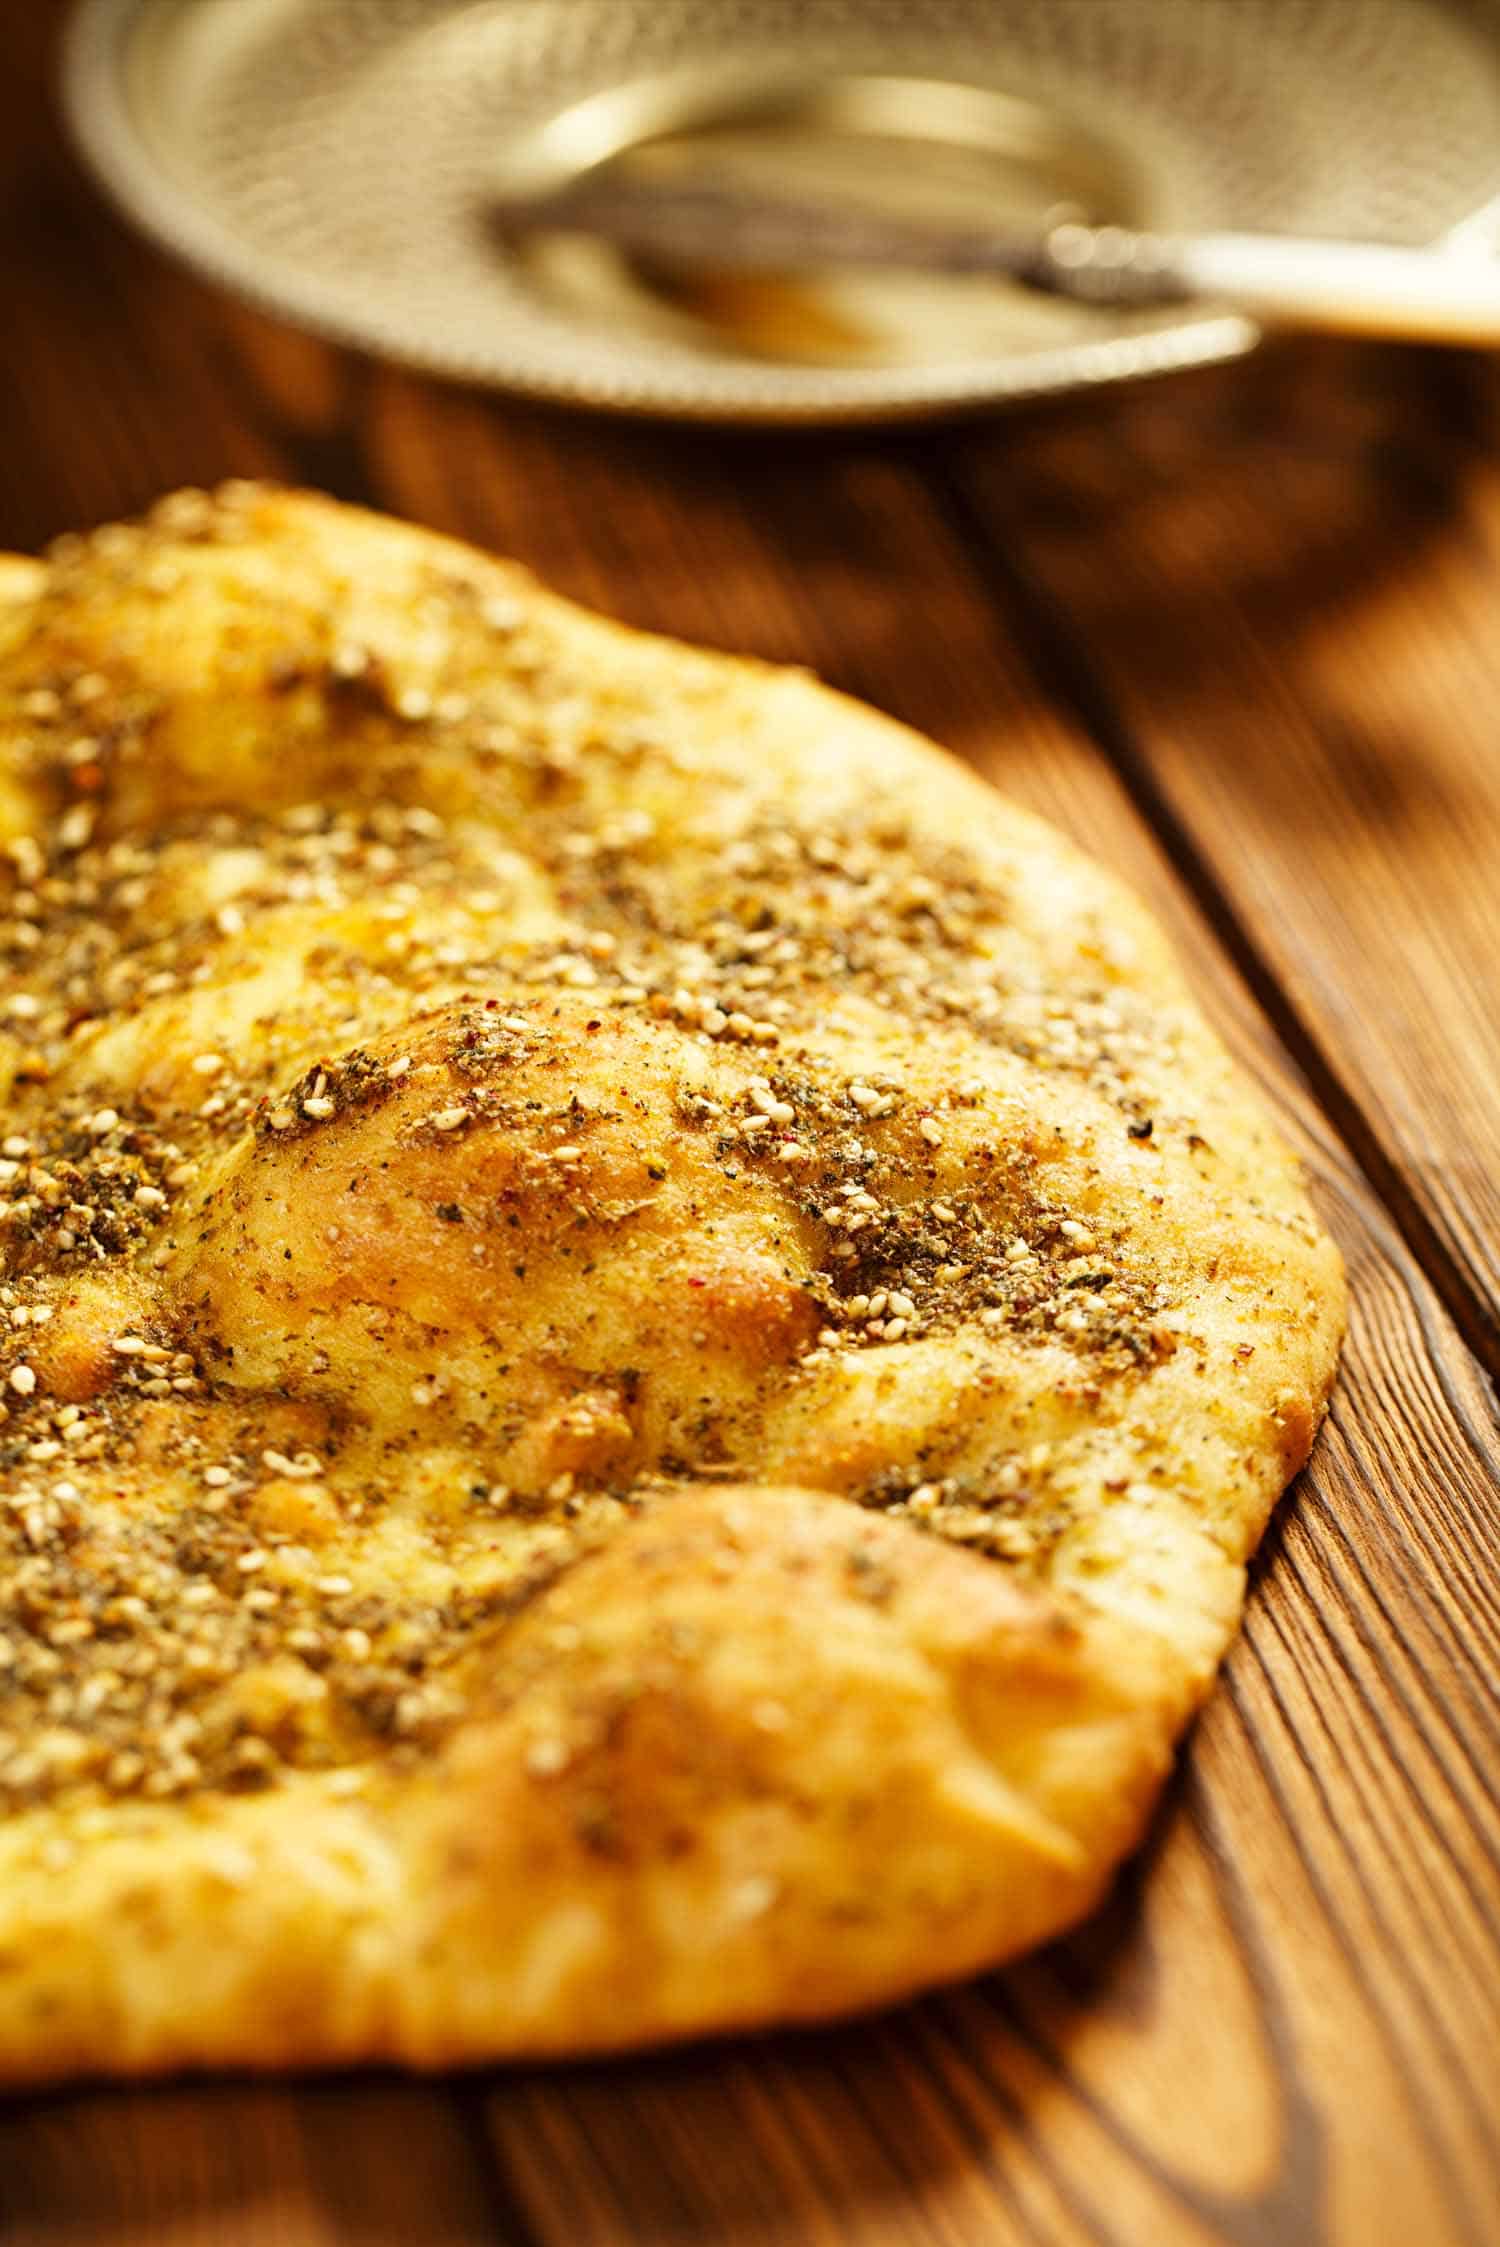 Jordanian spice Zaatar on Manakish spice mix with naan bread - traditional Middle Eastern blend made with thyme, sesame seeds, salt, sumac, oregano, cumin, fennel seeds and marjoram